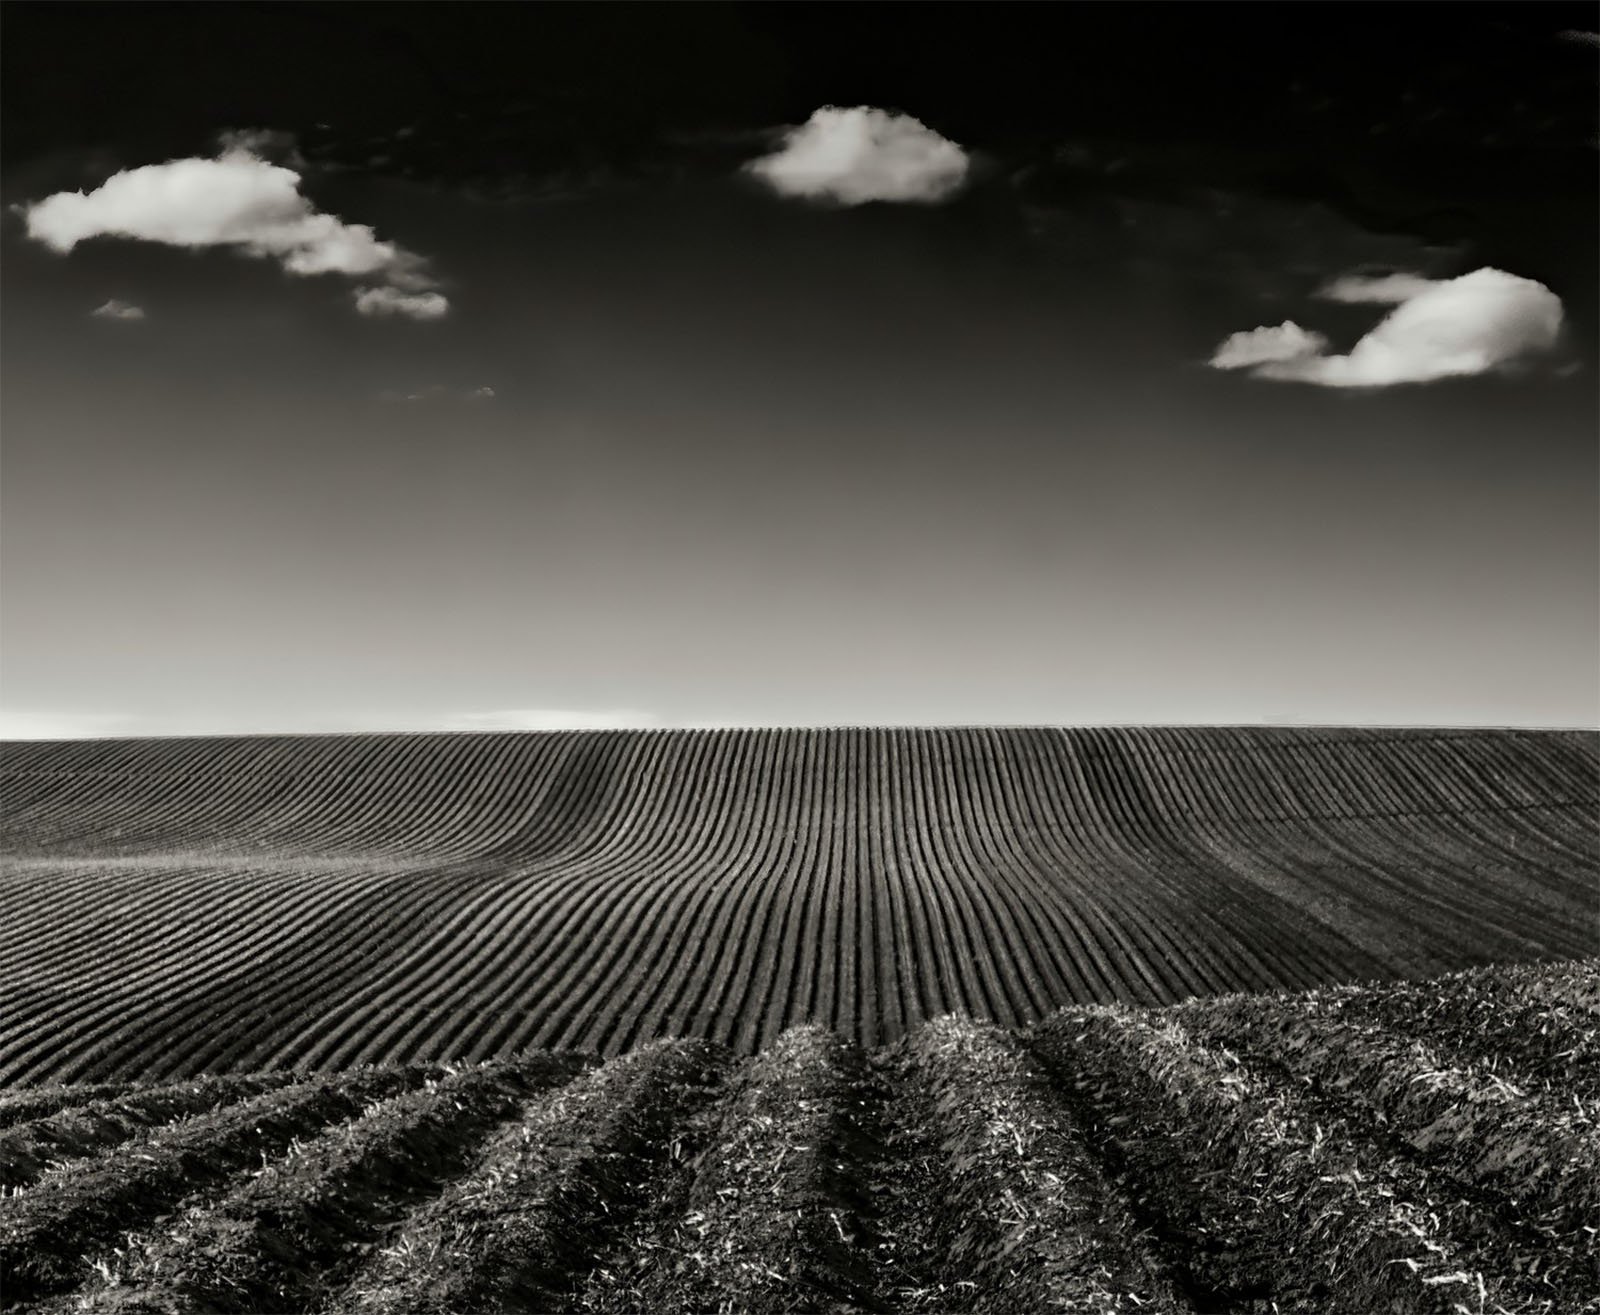 A black-and-white photo of an expansive agricultural field with neatly aligned rows of crops. The horizon meets a clear sky with a few scattered clouds, creating a tranquil and orderly landscape.